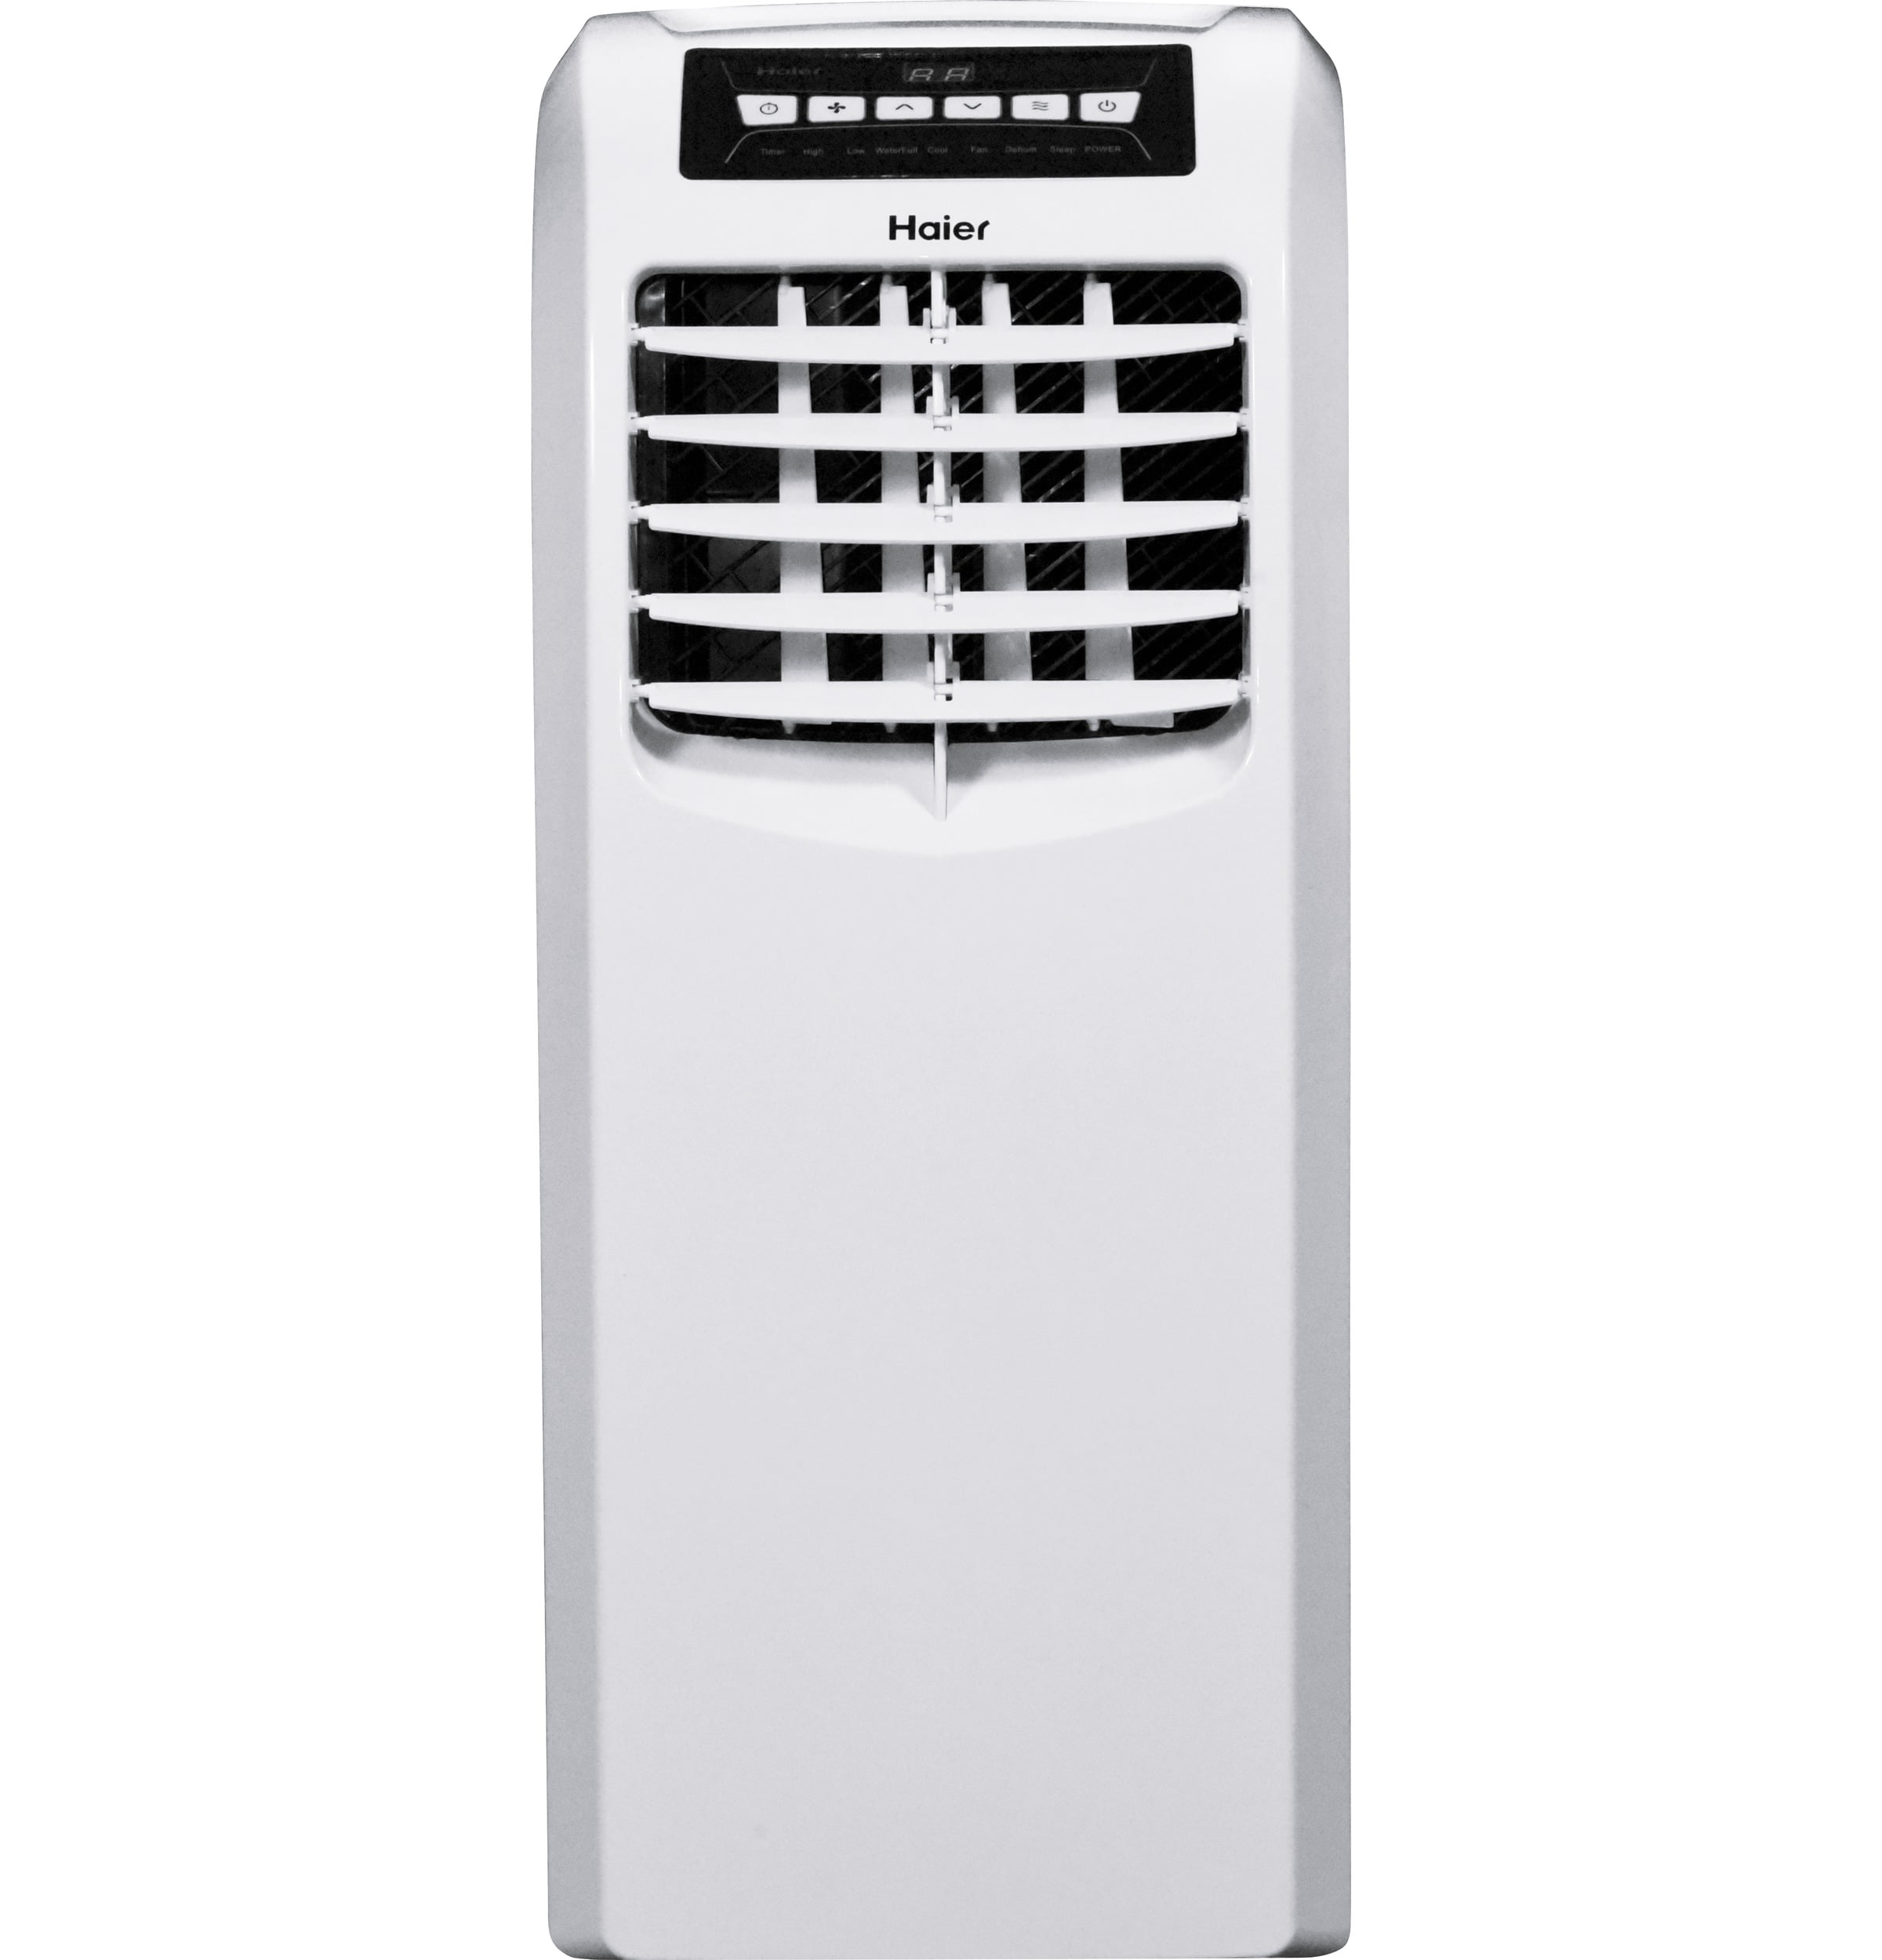 Fan White Haier QPCD08AXLW 8000 BTU 250 Square Foot Electric Portable Air Conditioner AC Cooling Unit with Remote Control and Dehumidifier Modes Renewed